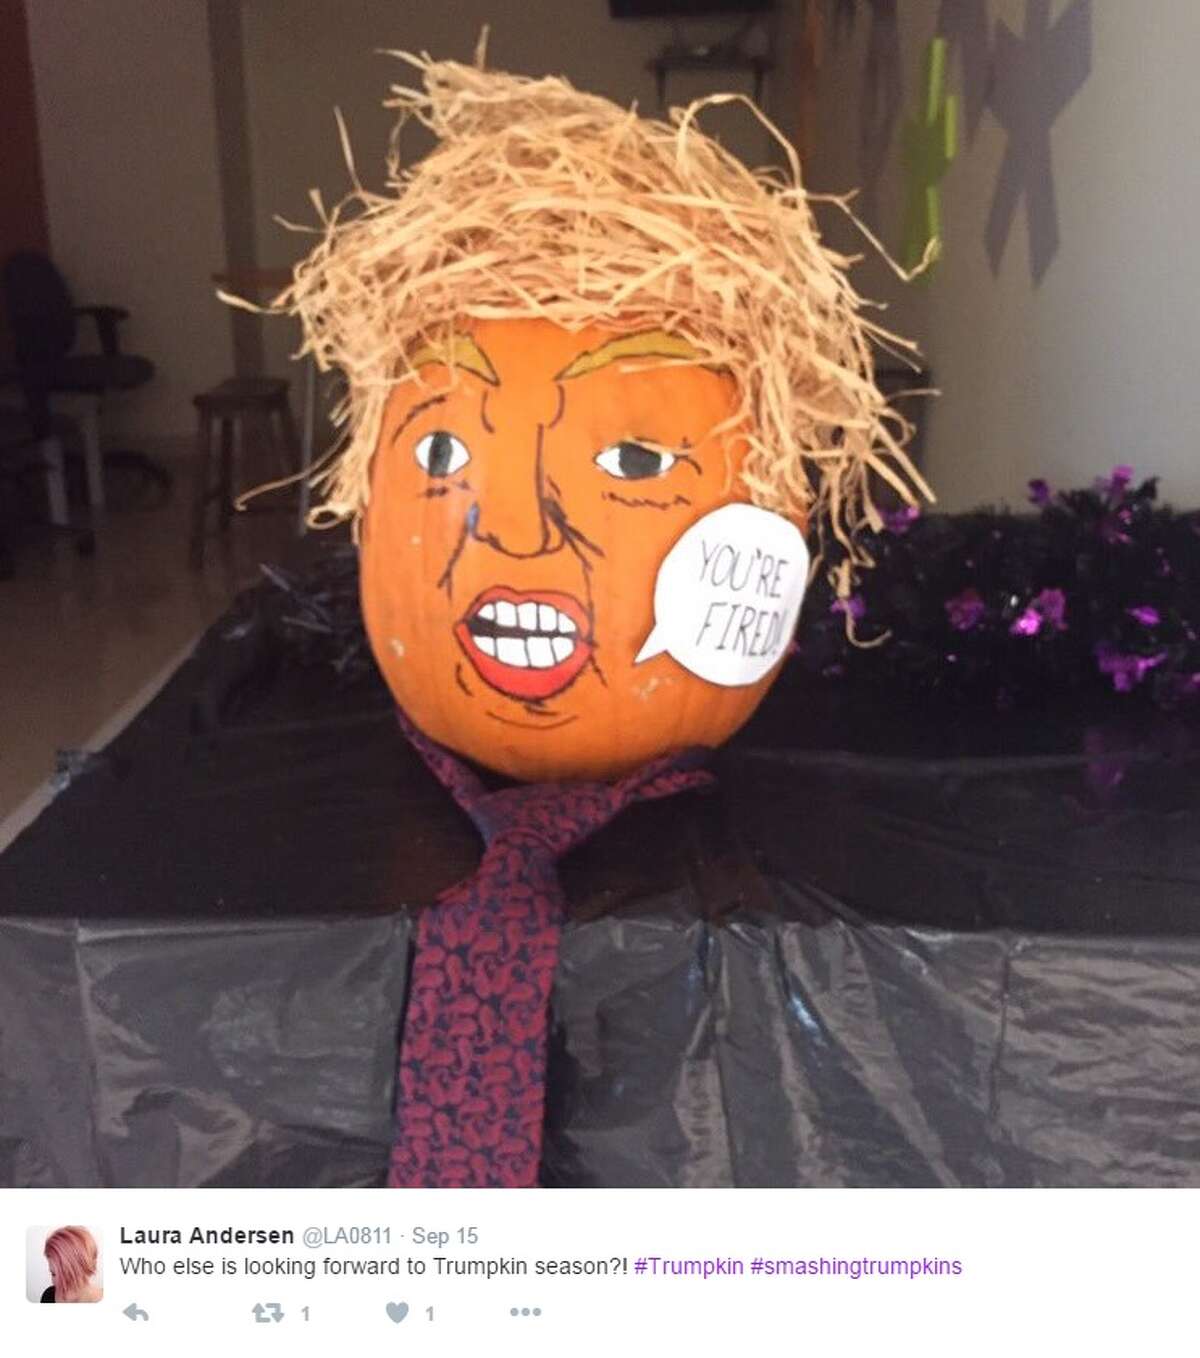 "Trumpkins" are pumpkins carved or painted to look like Donald Trump, the Republican nominee for president.